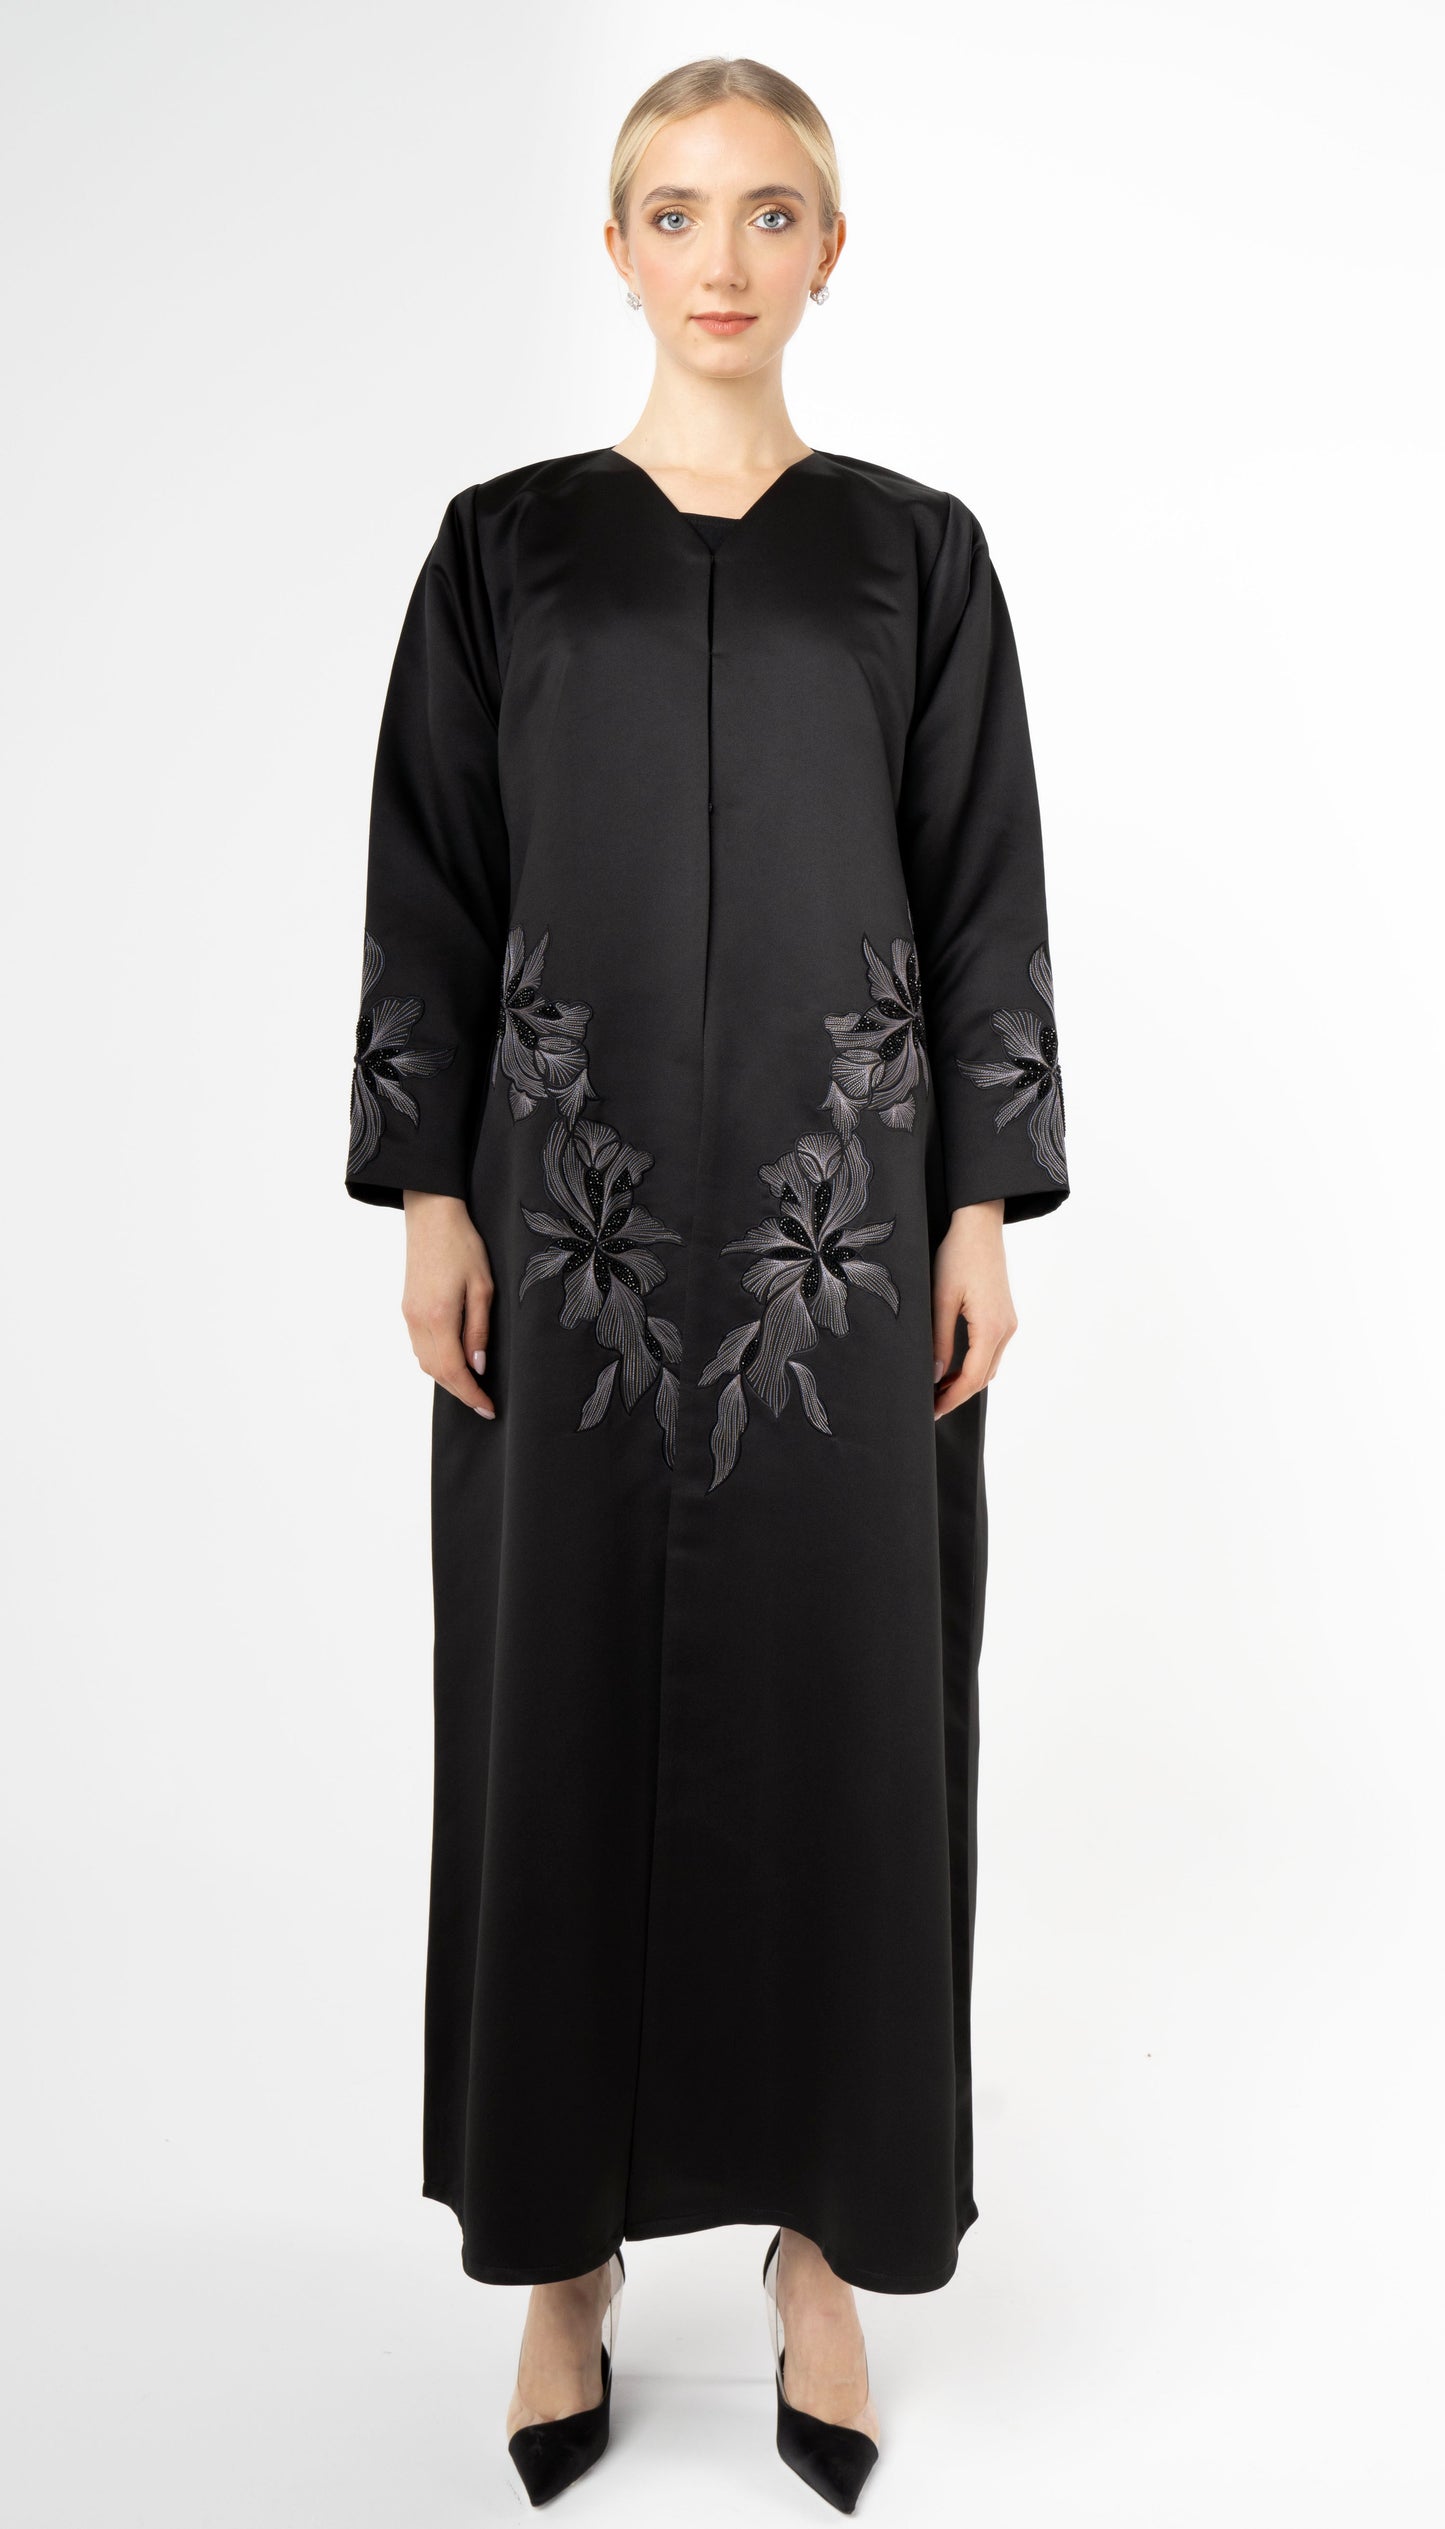 Black Abaya With Elegant Embroidery On Front And Sleeves